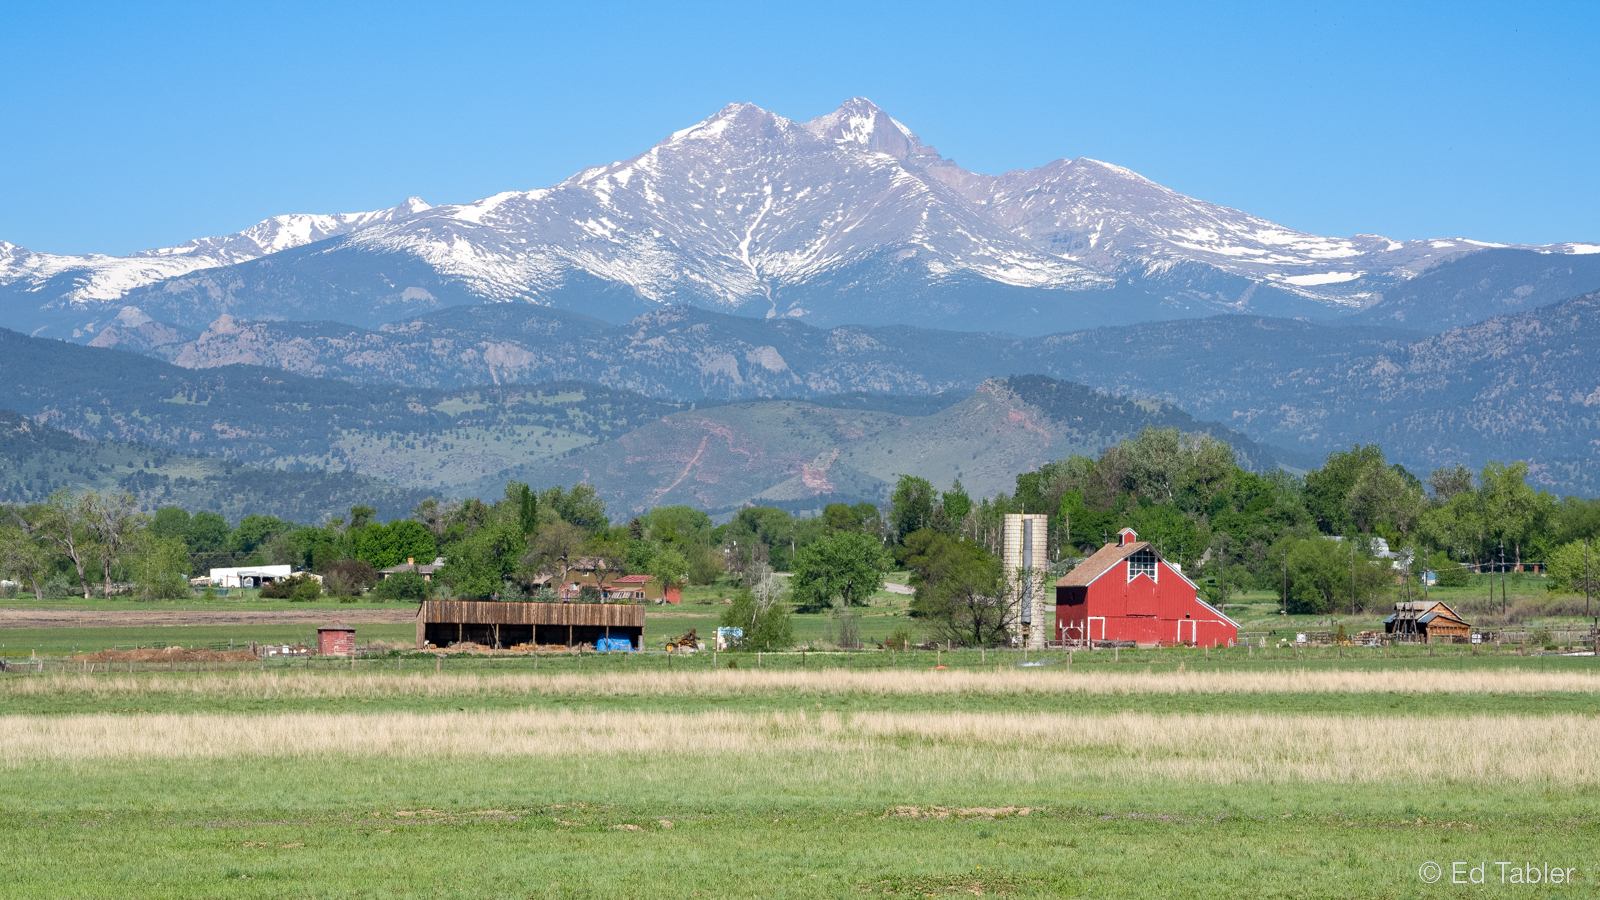 Longs Peak, elevation 14,259 feet, located in the Rocky Mountain National Park Wilderness of Colorado.